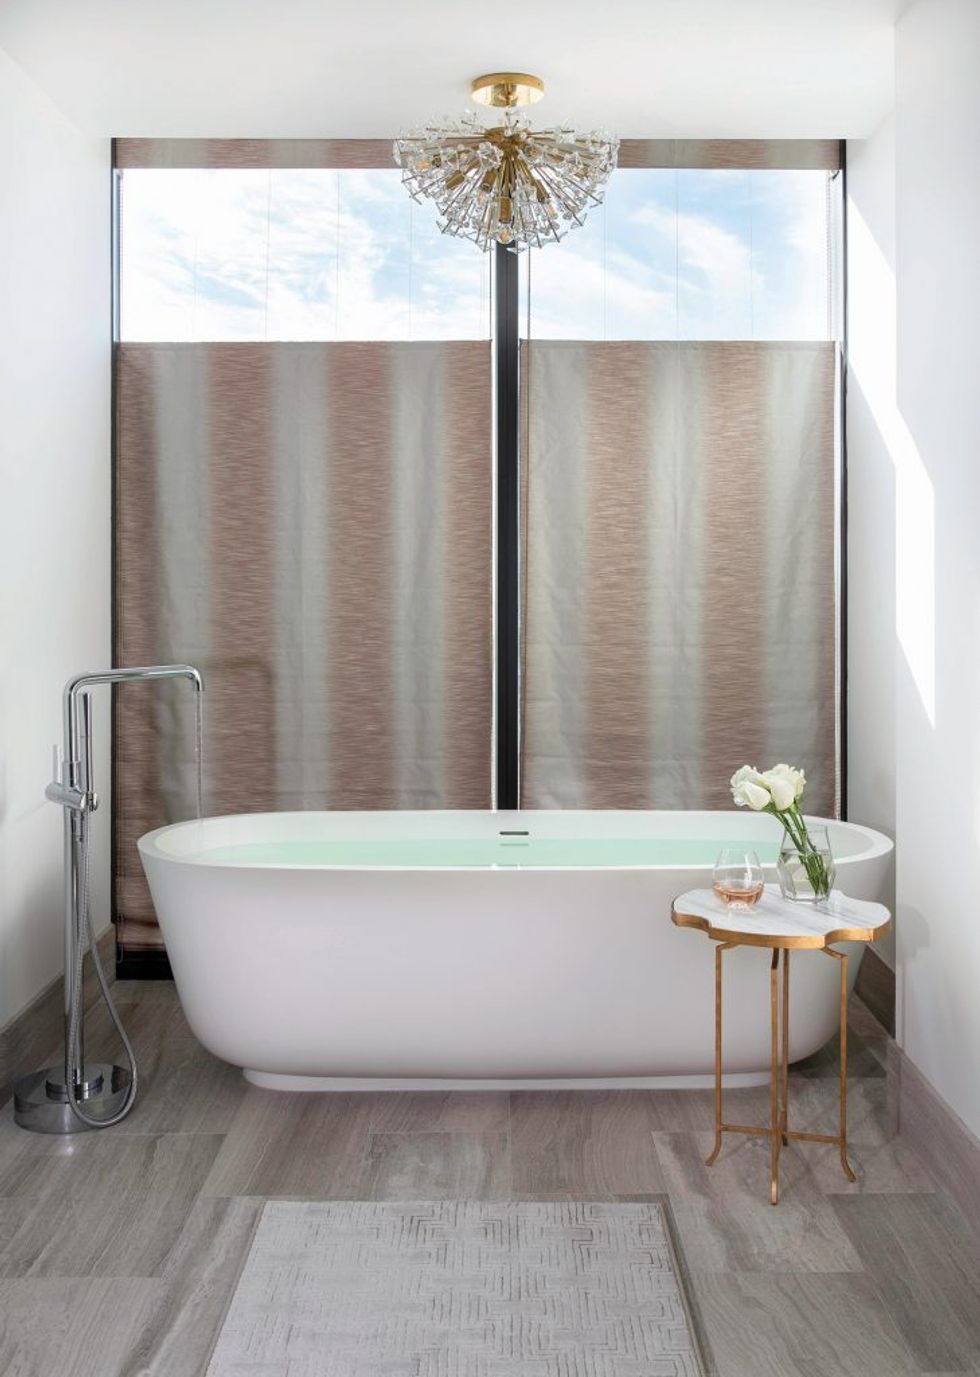 In the master bathroom, a top-down shade in Jane Churchill fabric lets in natural light while offering privacy